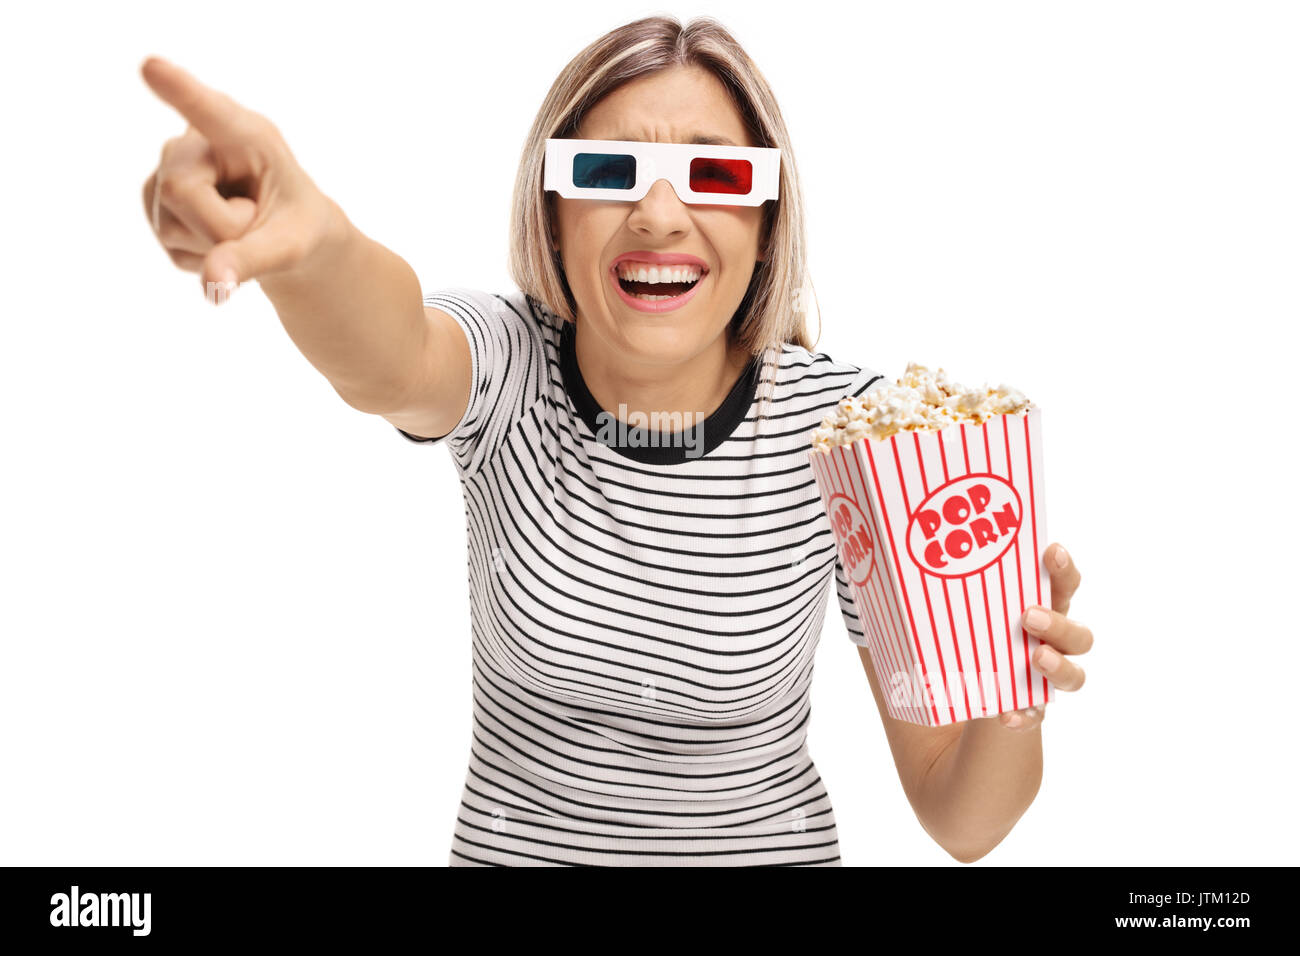 Young woman with 3D glasses and popcorn pointing and laughing isolated on white background Stock Photo